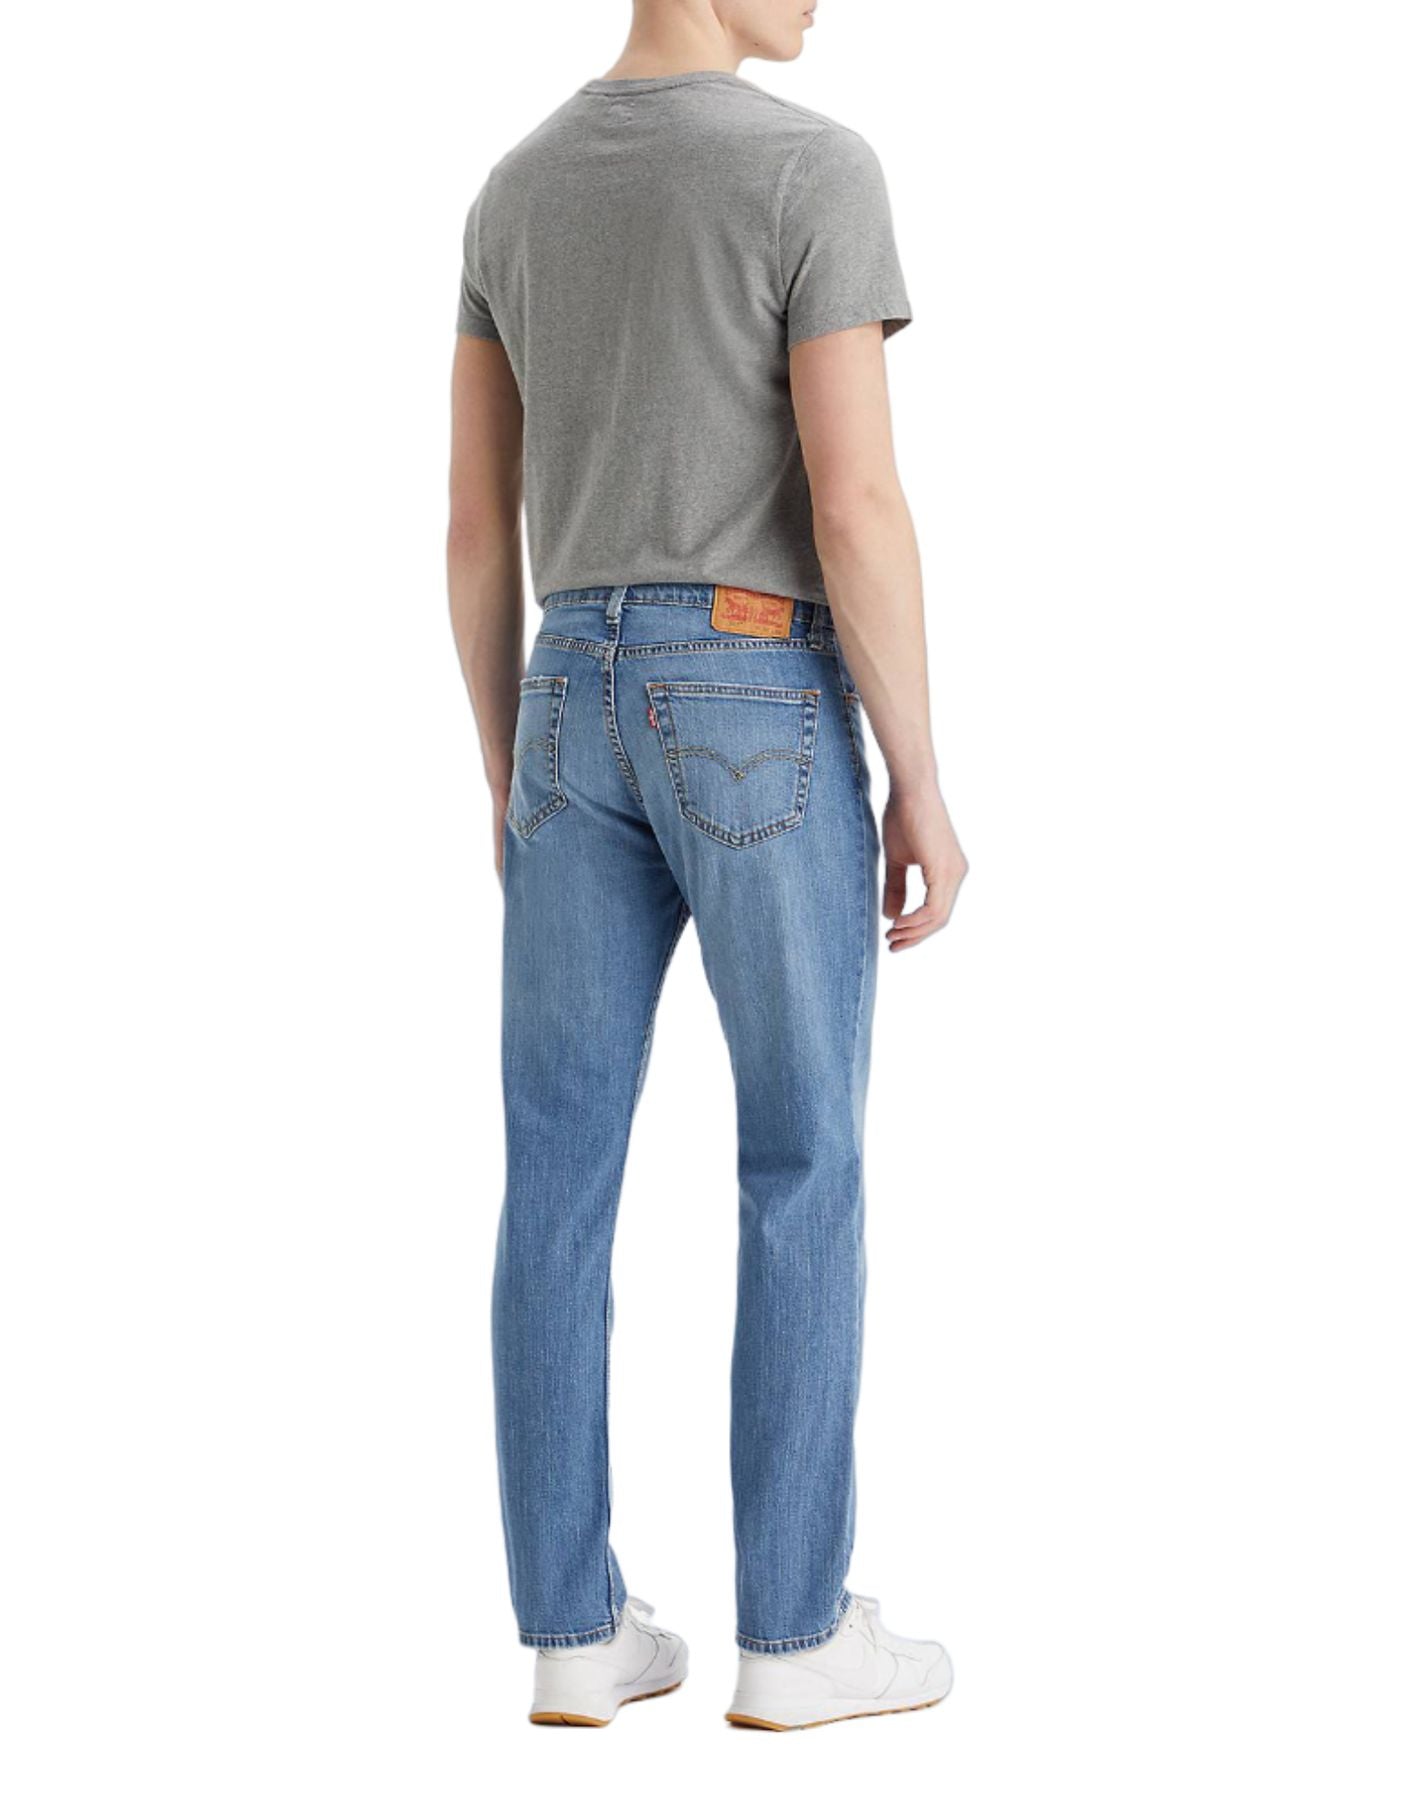 Jeans for man 045115646 MARK MY WORDS Levi's